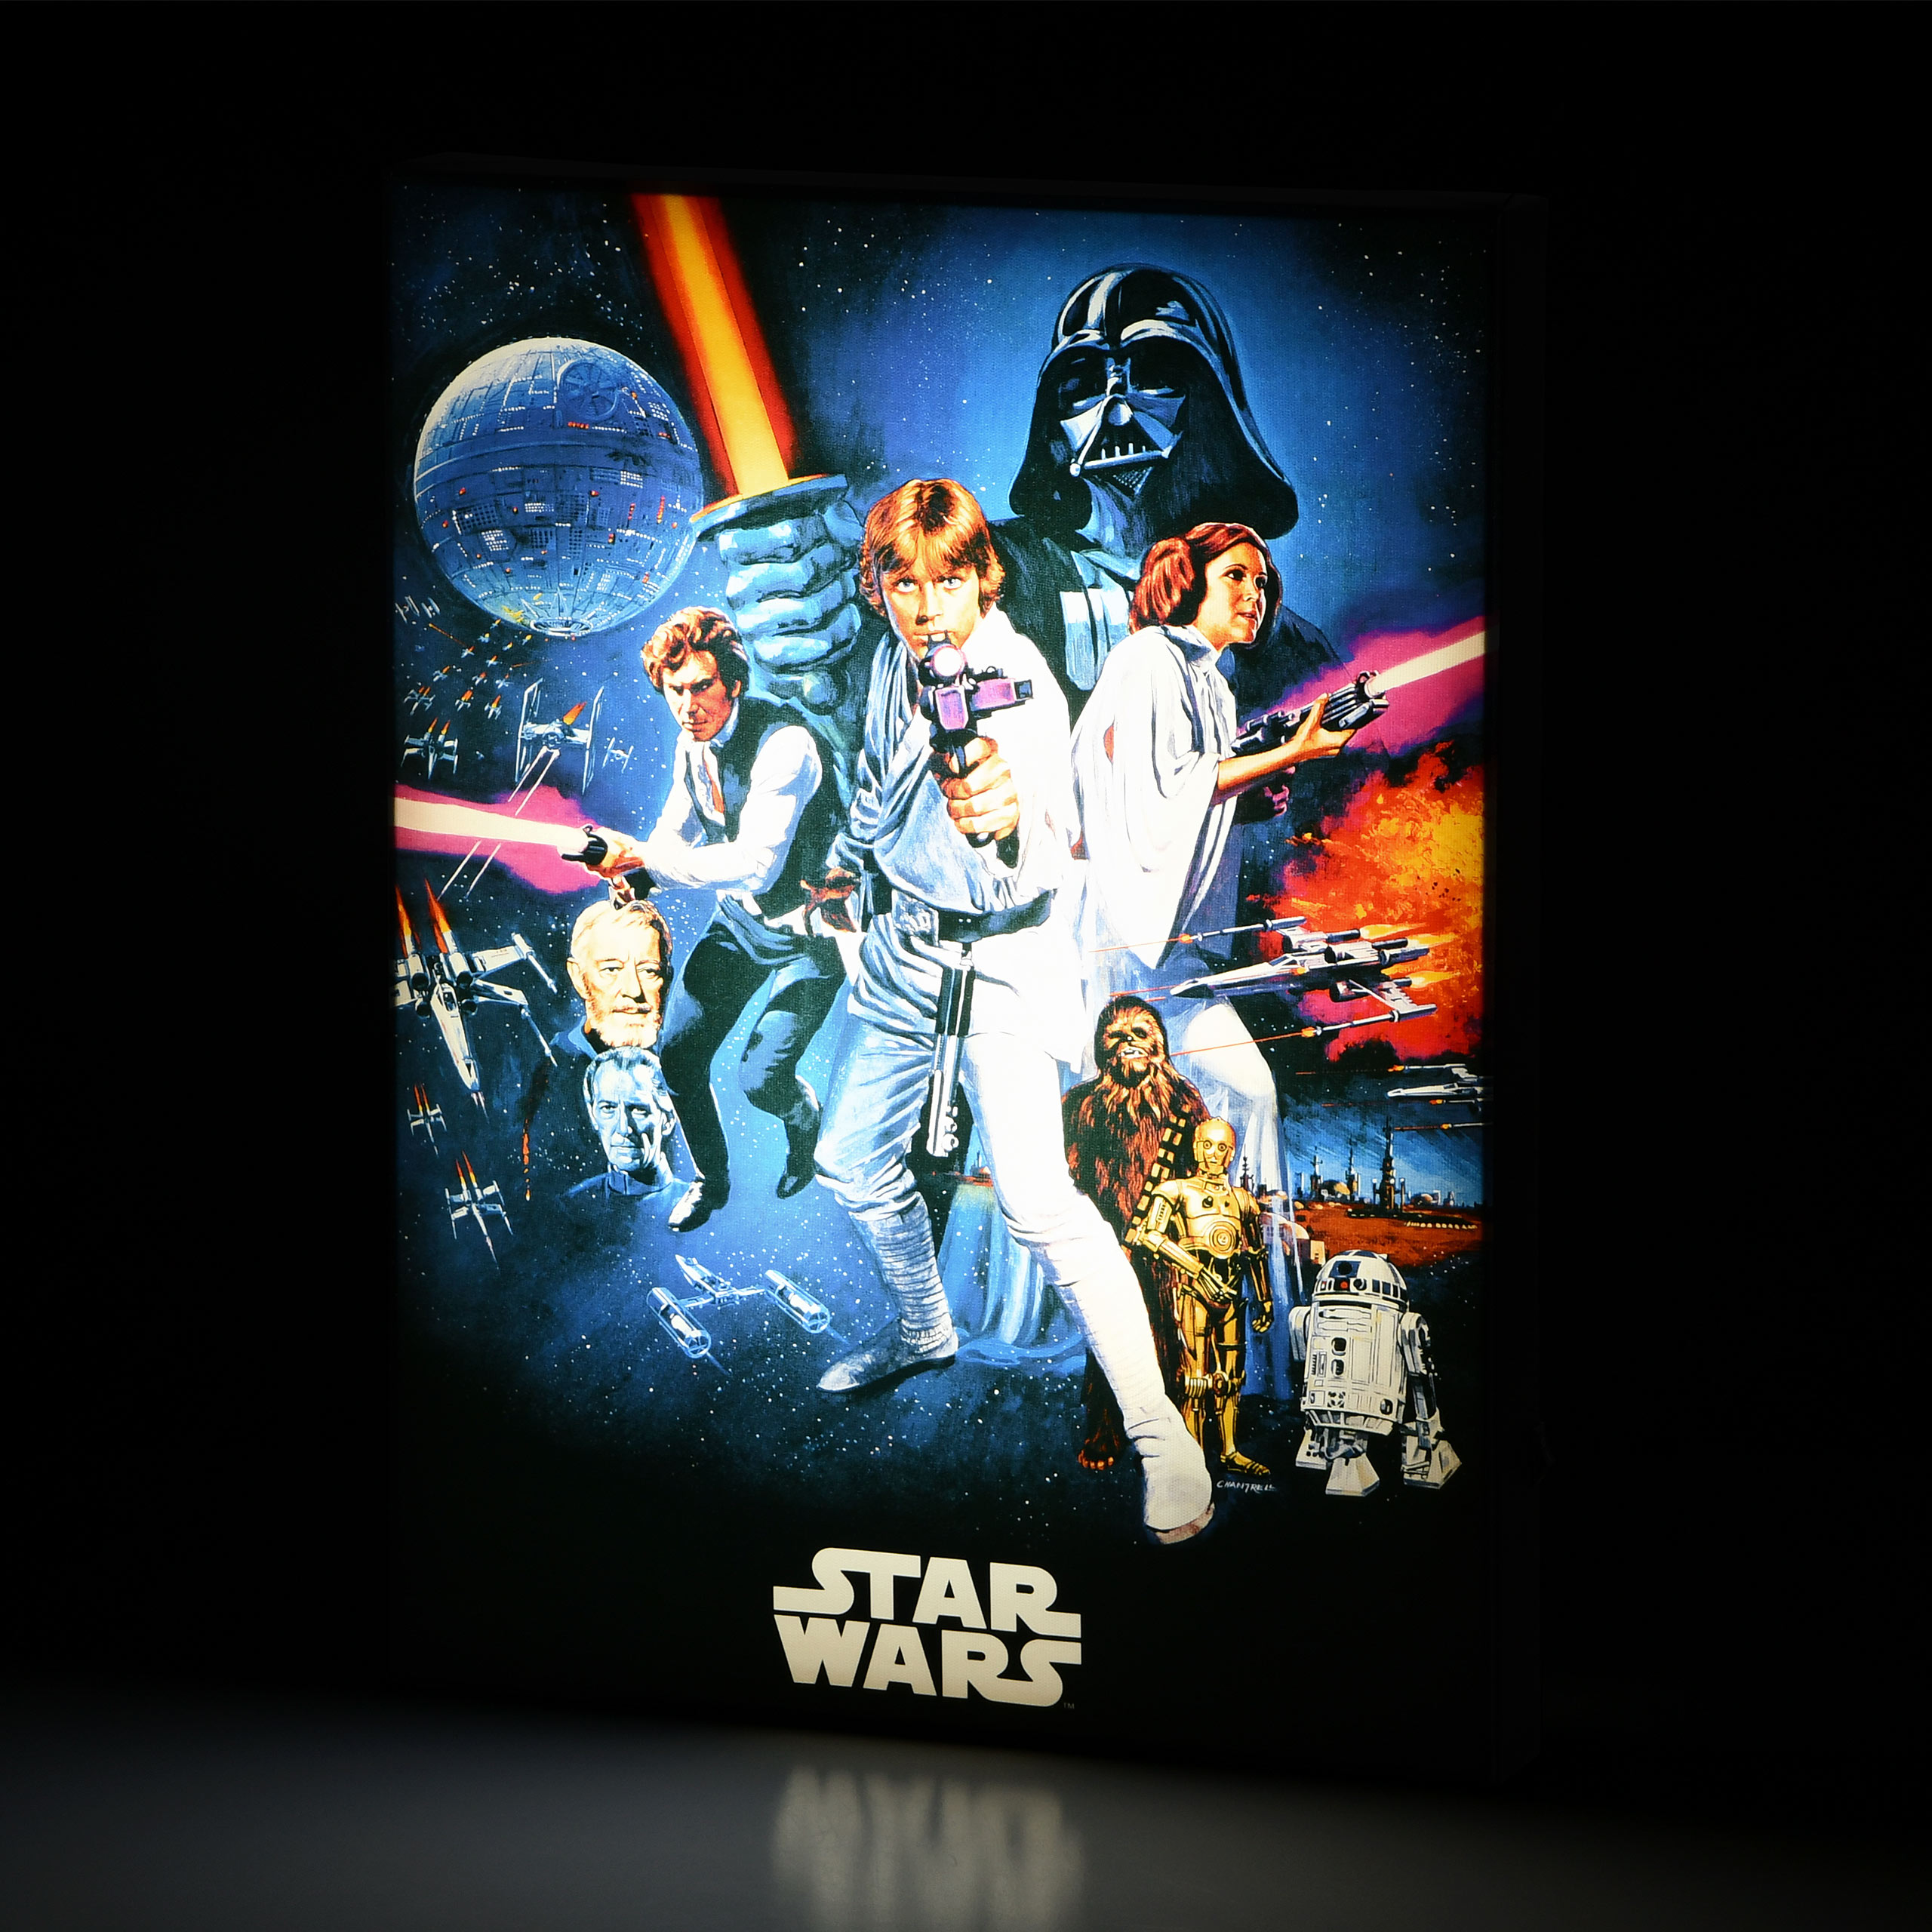 Star Wars - A New Hope mural with light